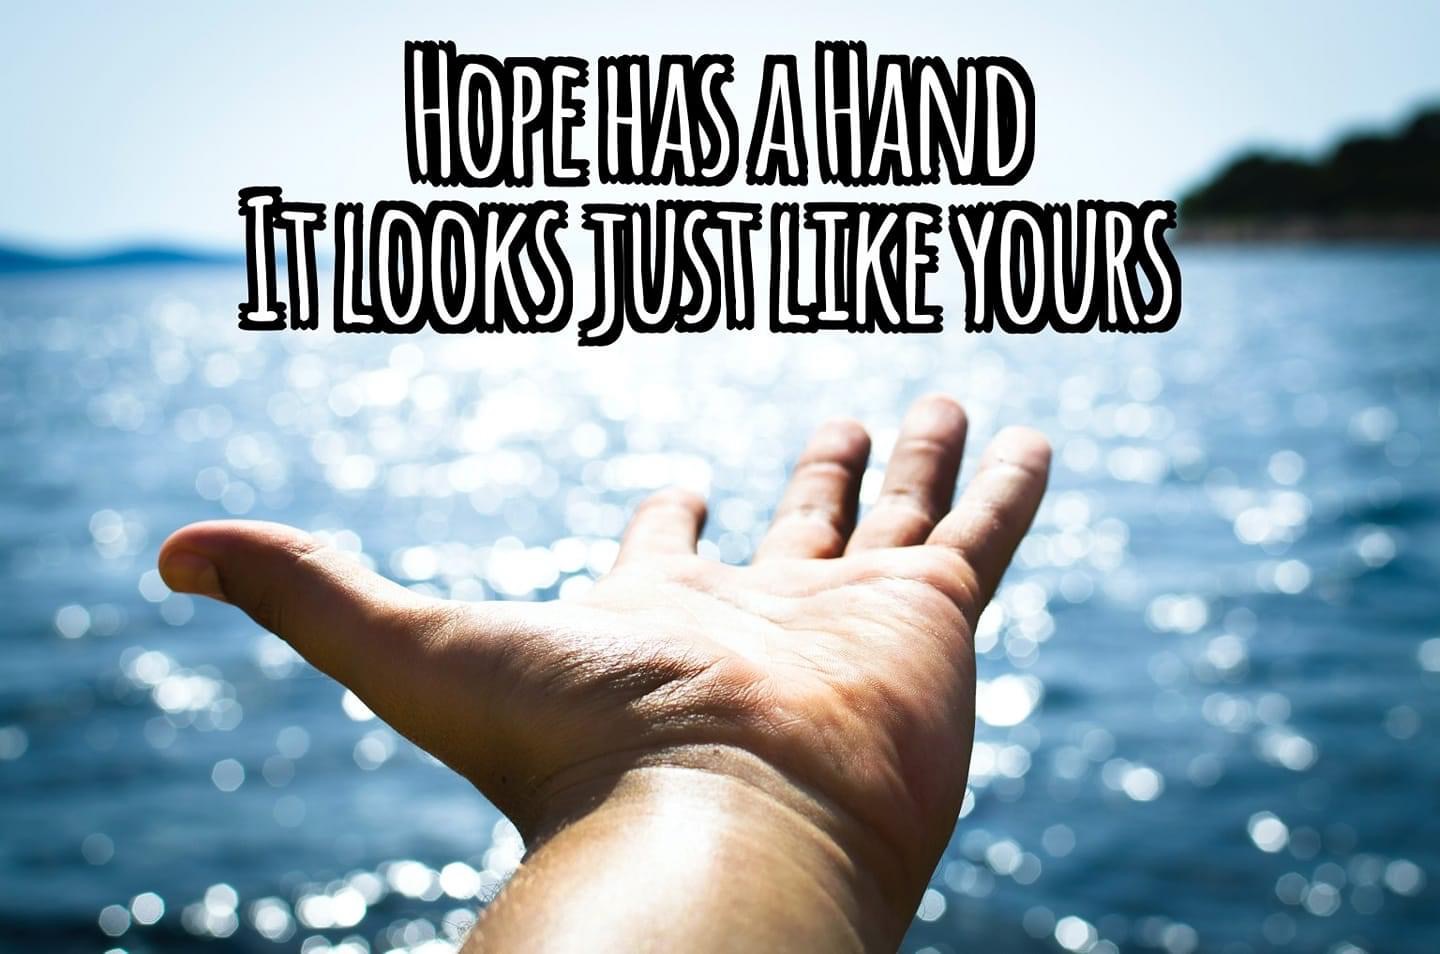 A photo of an outstretched hand reaching over a lake. With the quote, "Hope has a hand, it looks just like yours." 